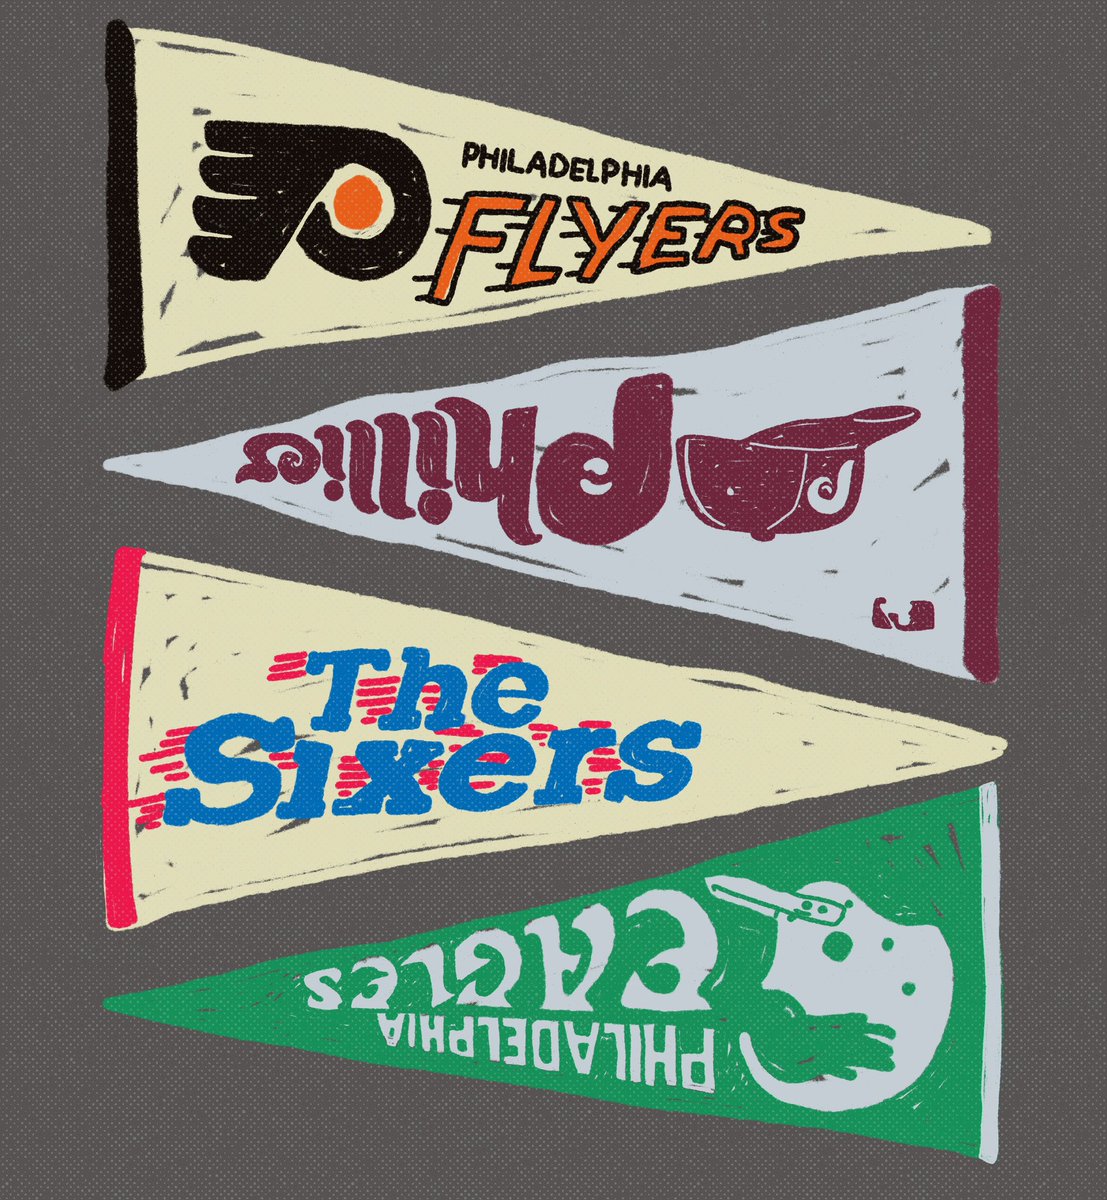 Pennant print. Illustrated by me. #RingTheBell #HereTheyCome #FlyEaglesFly @Phillies @Eagles @sixers @NHLFlyers